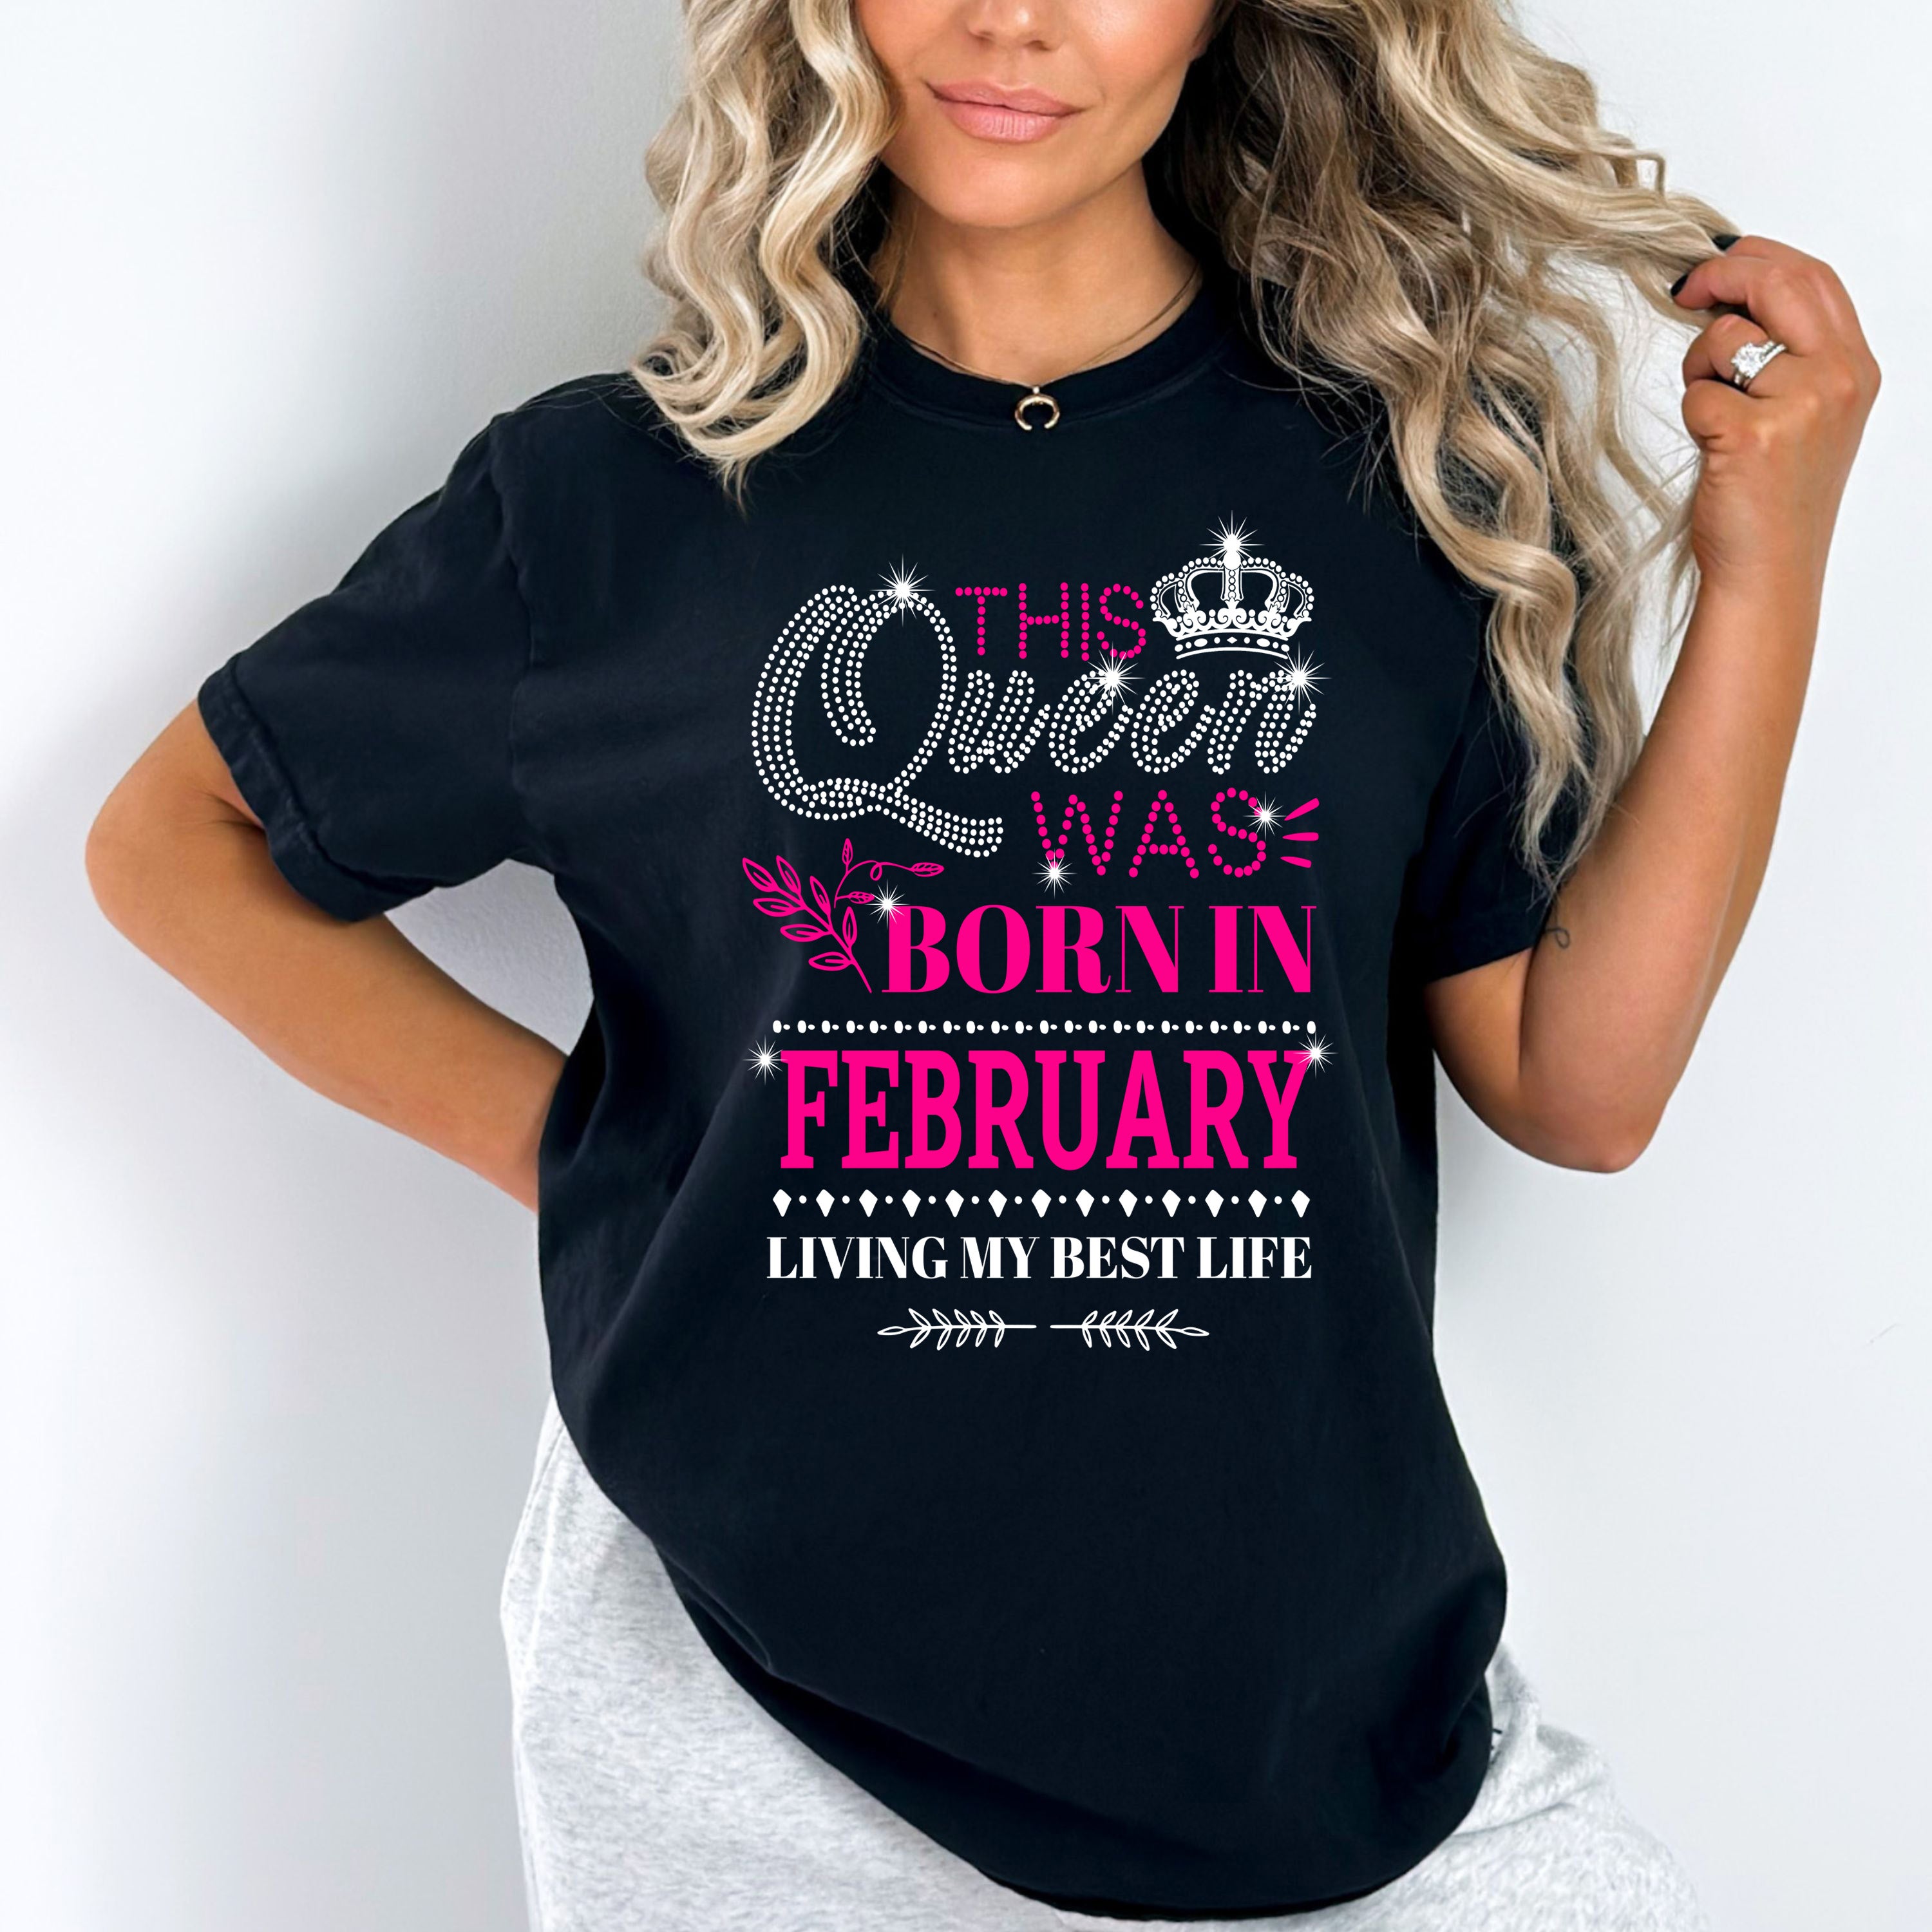 "This Queen Was Born In FEBRUARY Birthday"